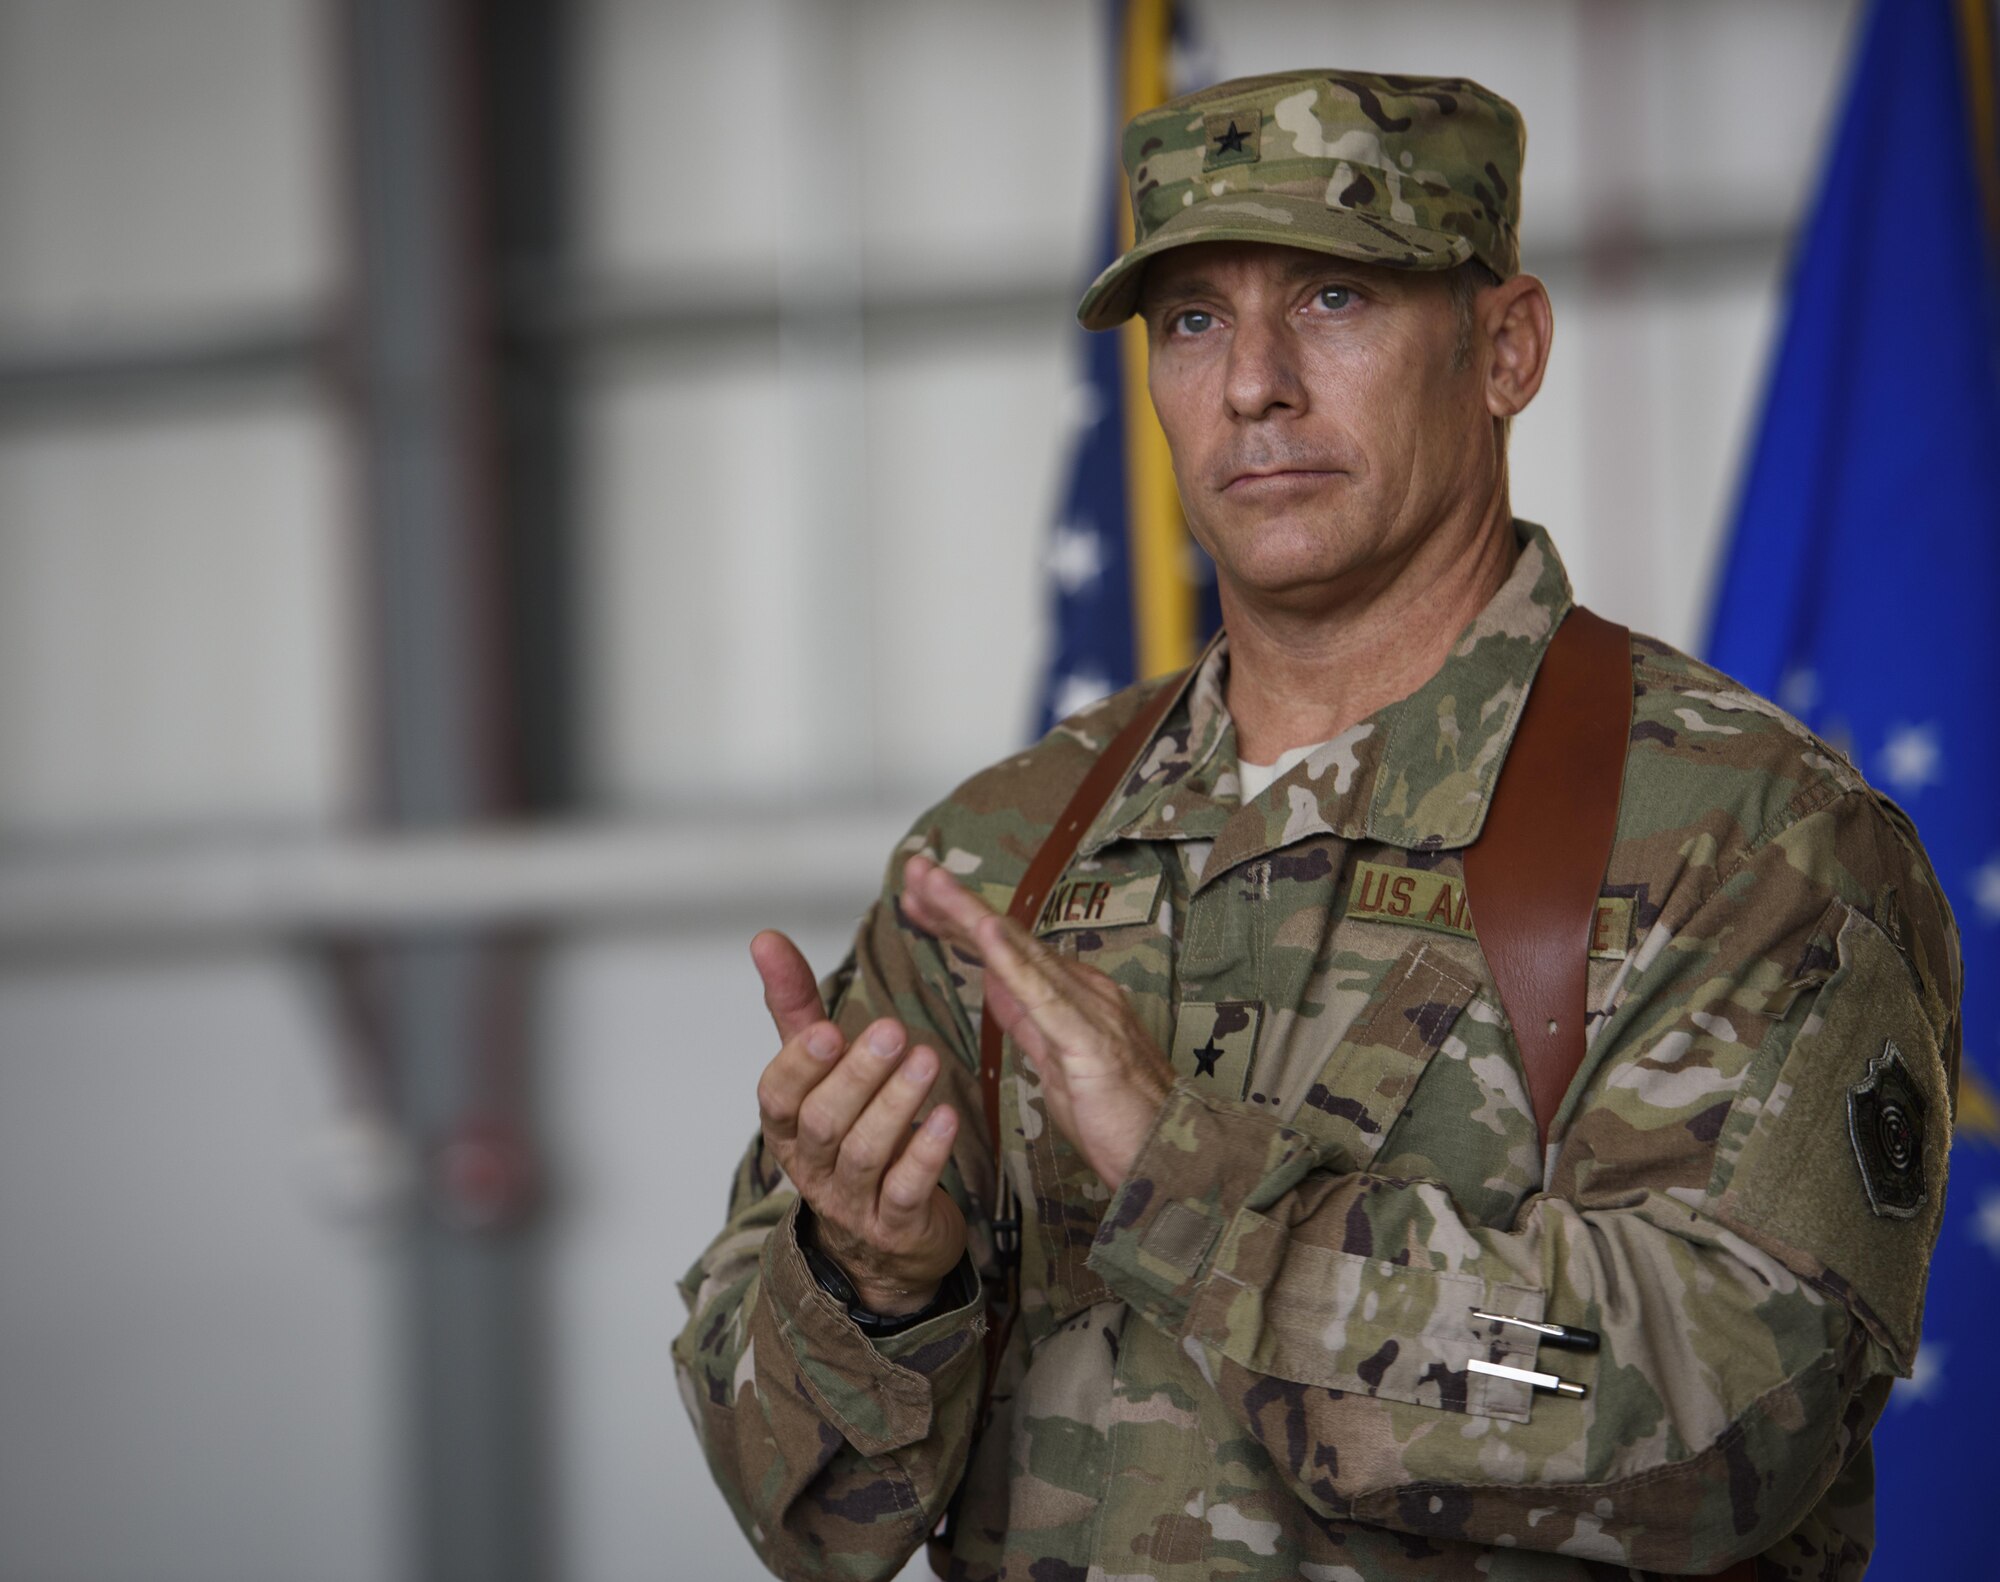 Brig. Gen. Craig Baker, the 455th Air Expeditionary Wing commander, gives a round of applause during a change of command ceremony at Bagram Airfield, Afghanistan, June 3, 2017. As the commander of the 455th AEW, Baker will lead the premier counterterrorism air mission in Afghanistan. The wing’s operations enable the NATO Resolute Support mission to successfully train, advise, and assist the military and security forces of Afghanistan, while restricting and deterring the terrorist threat in the region. (U.S. Air Force photo by Staff Sgt. Benjamin Gonsier)